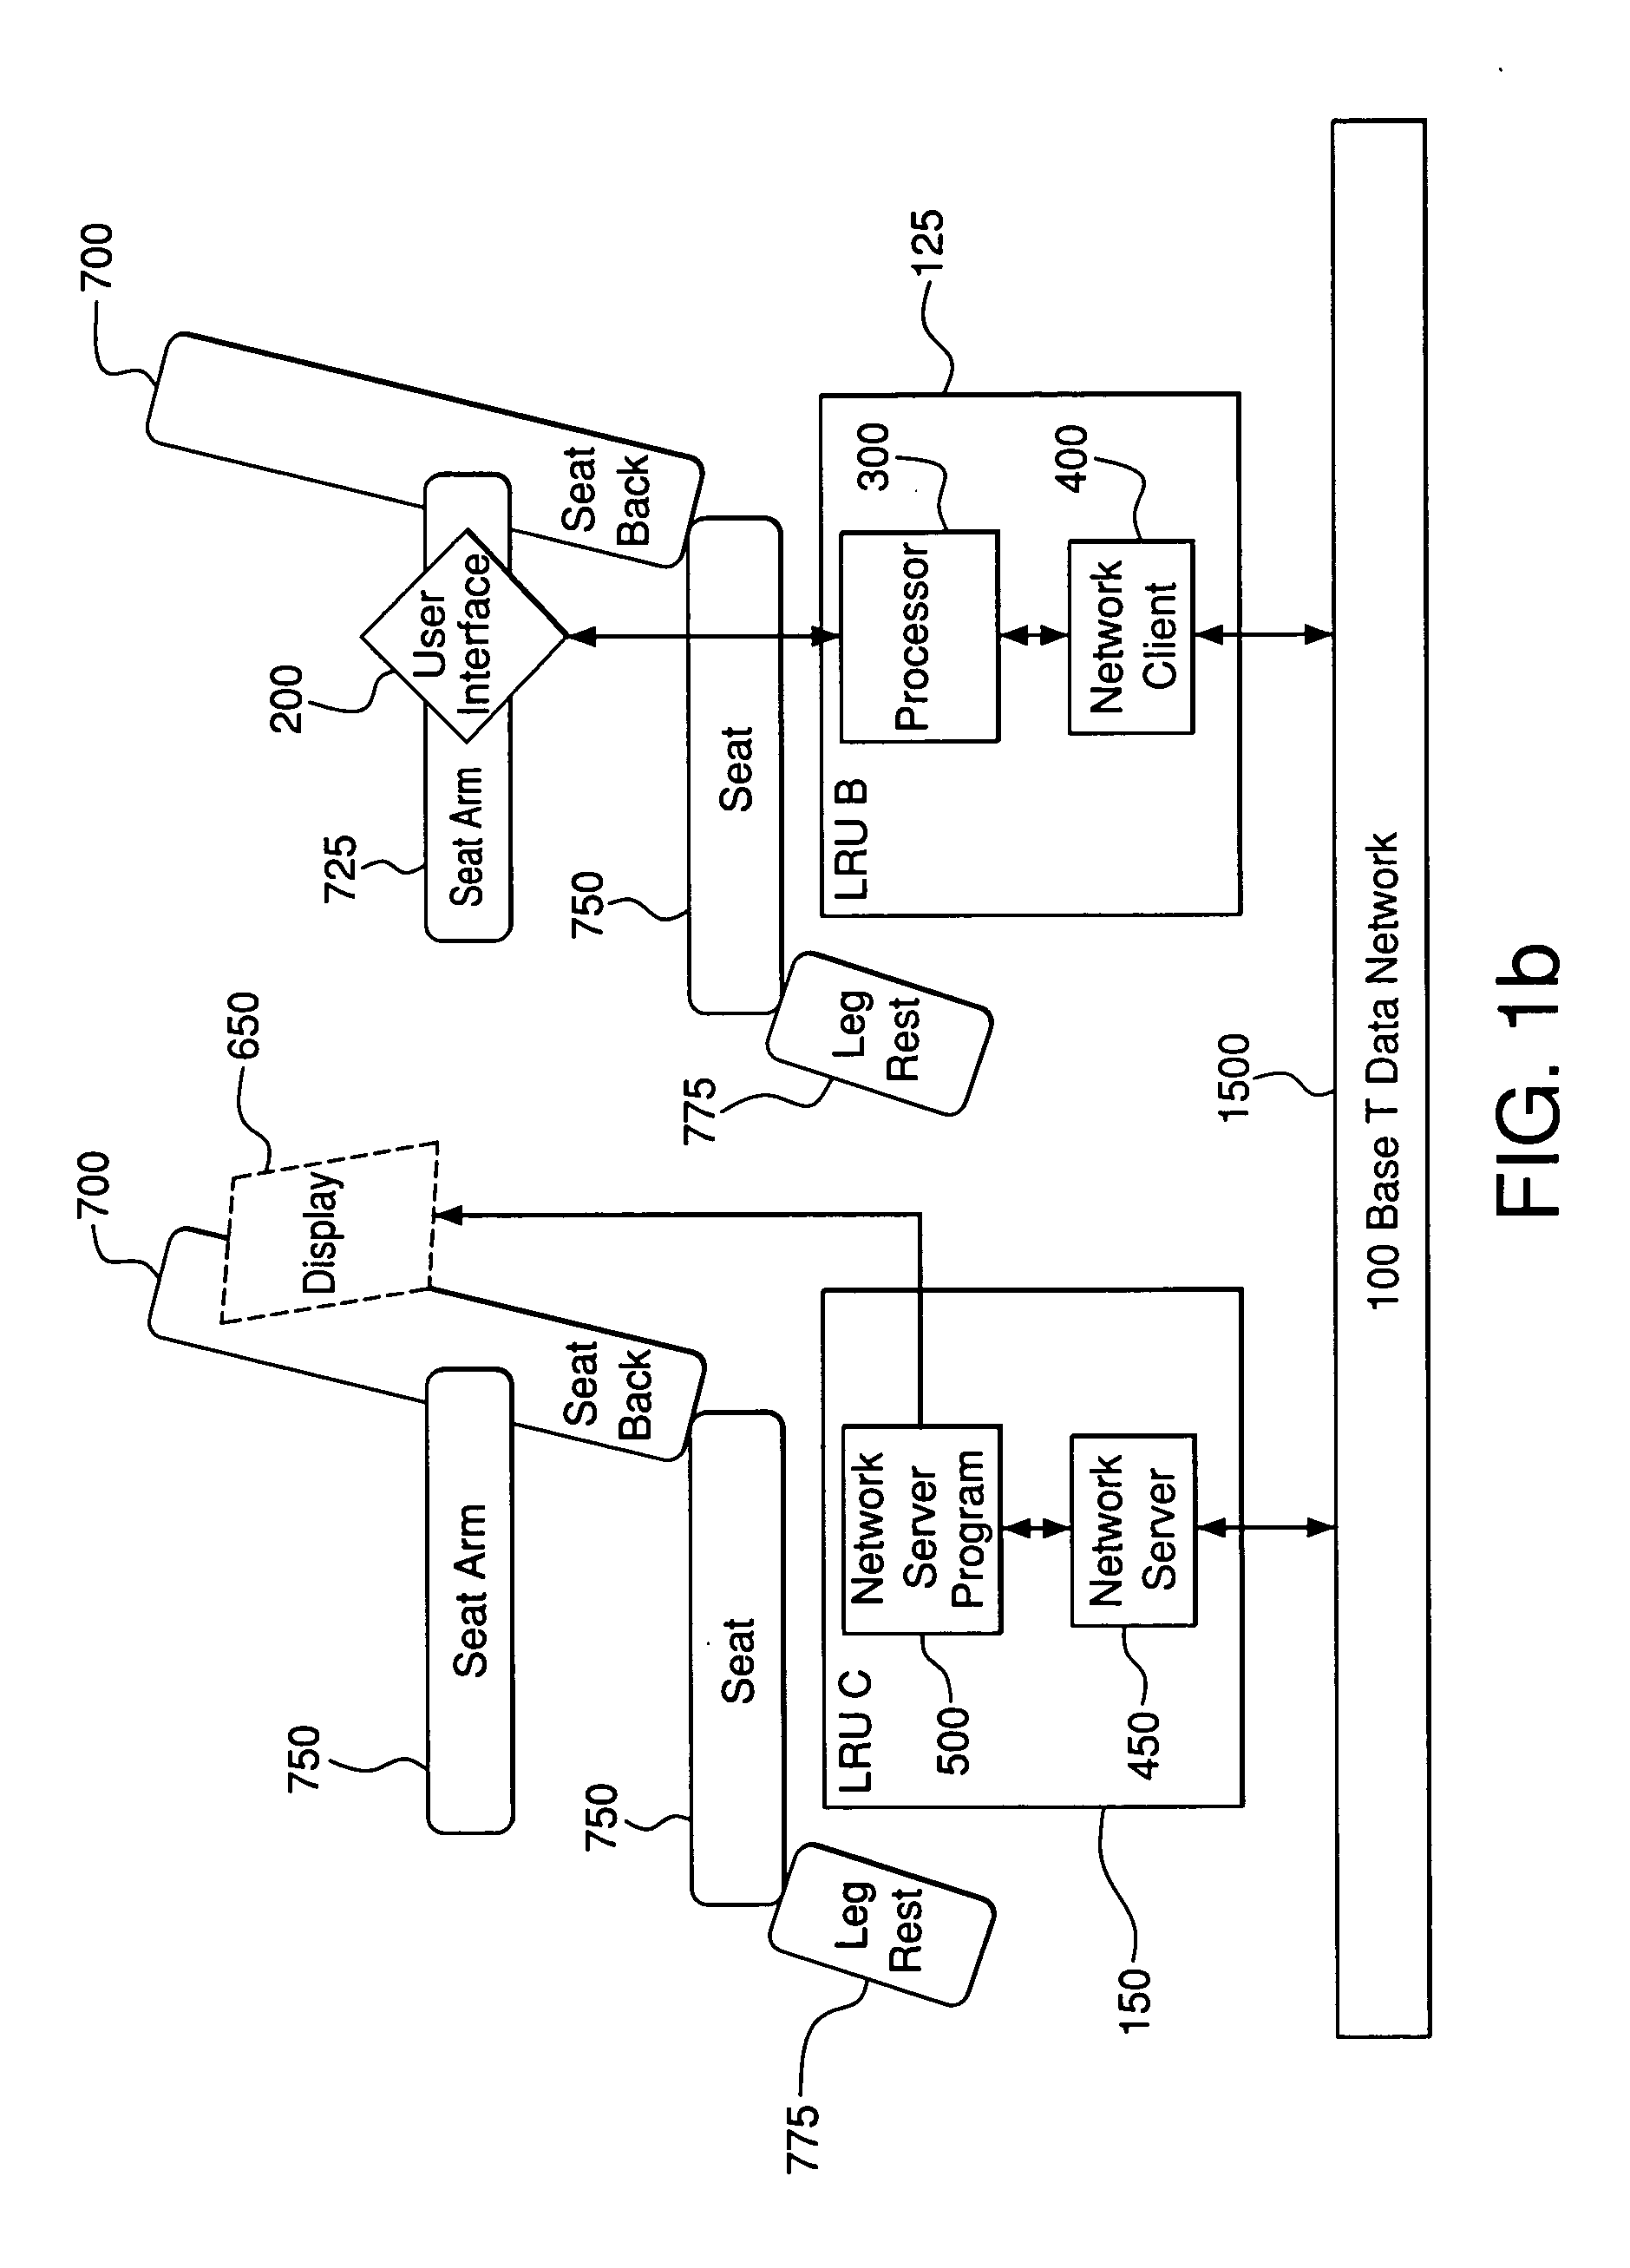 Broadcast passenger flight information system and method for using the same